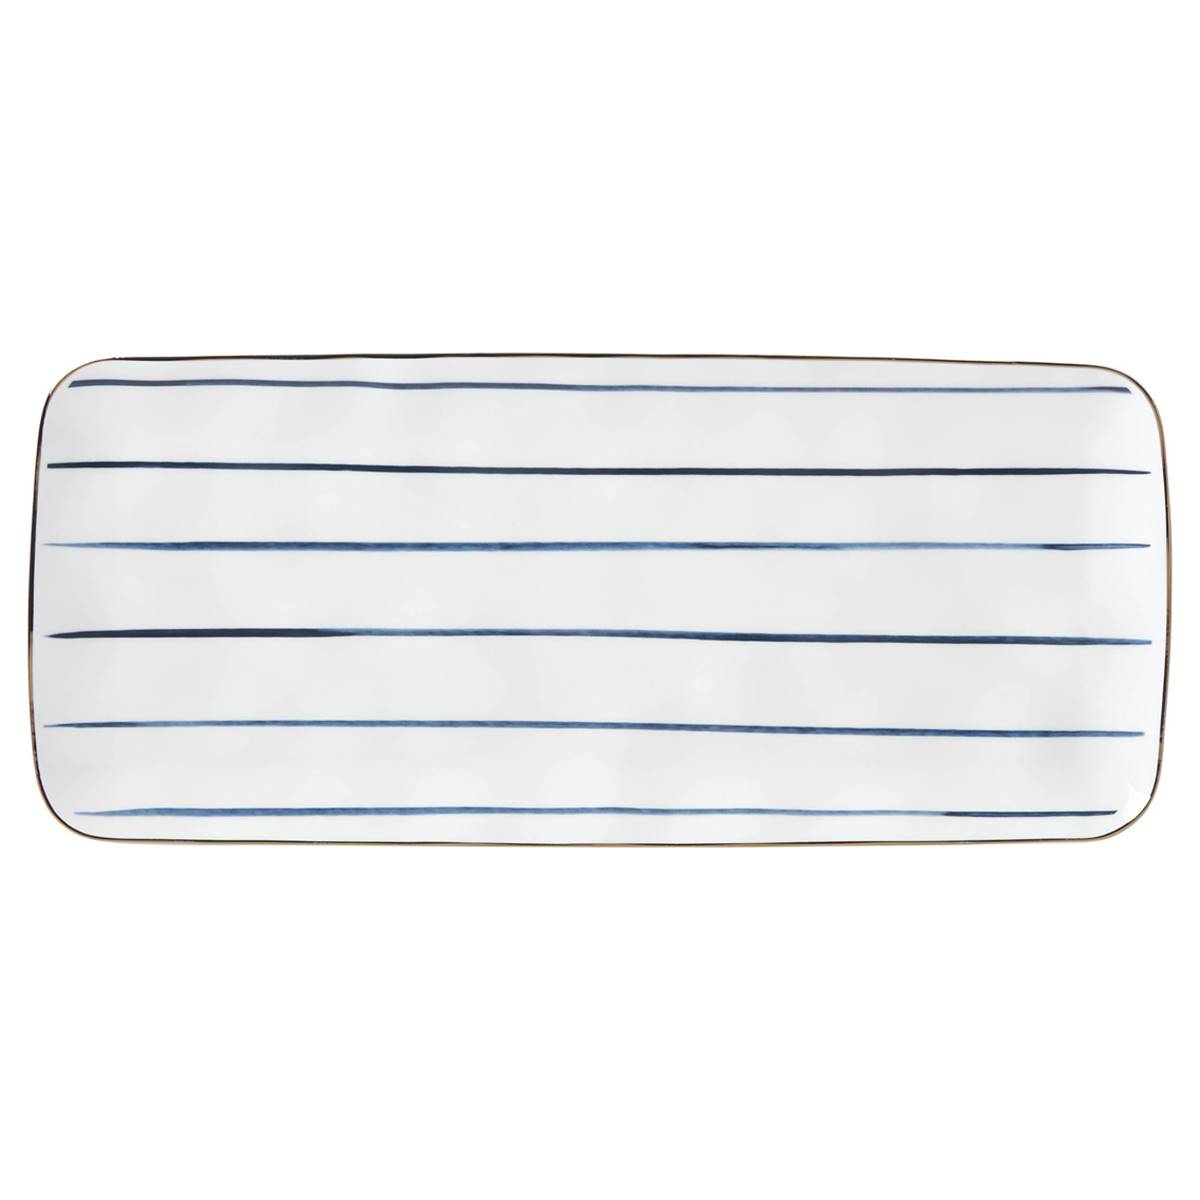 Lenox(R) Blue Bay(tm) Hors Doeuvres Serving Tray